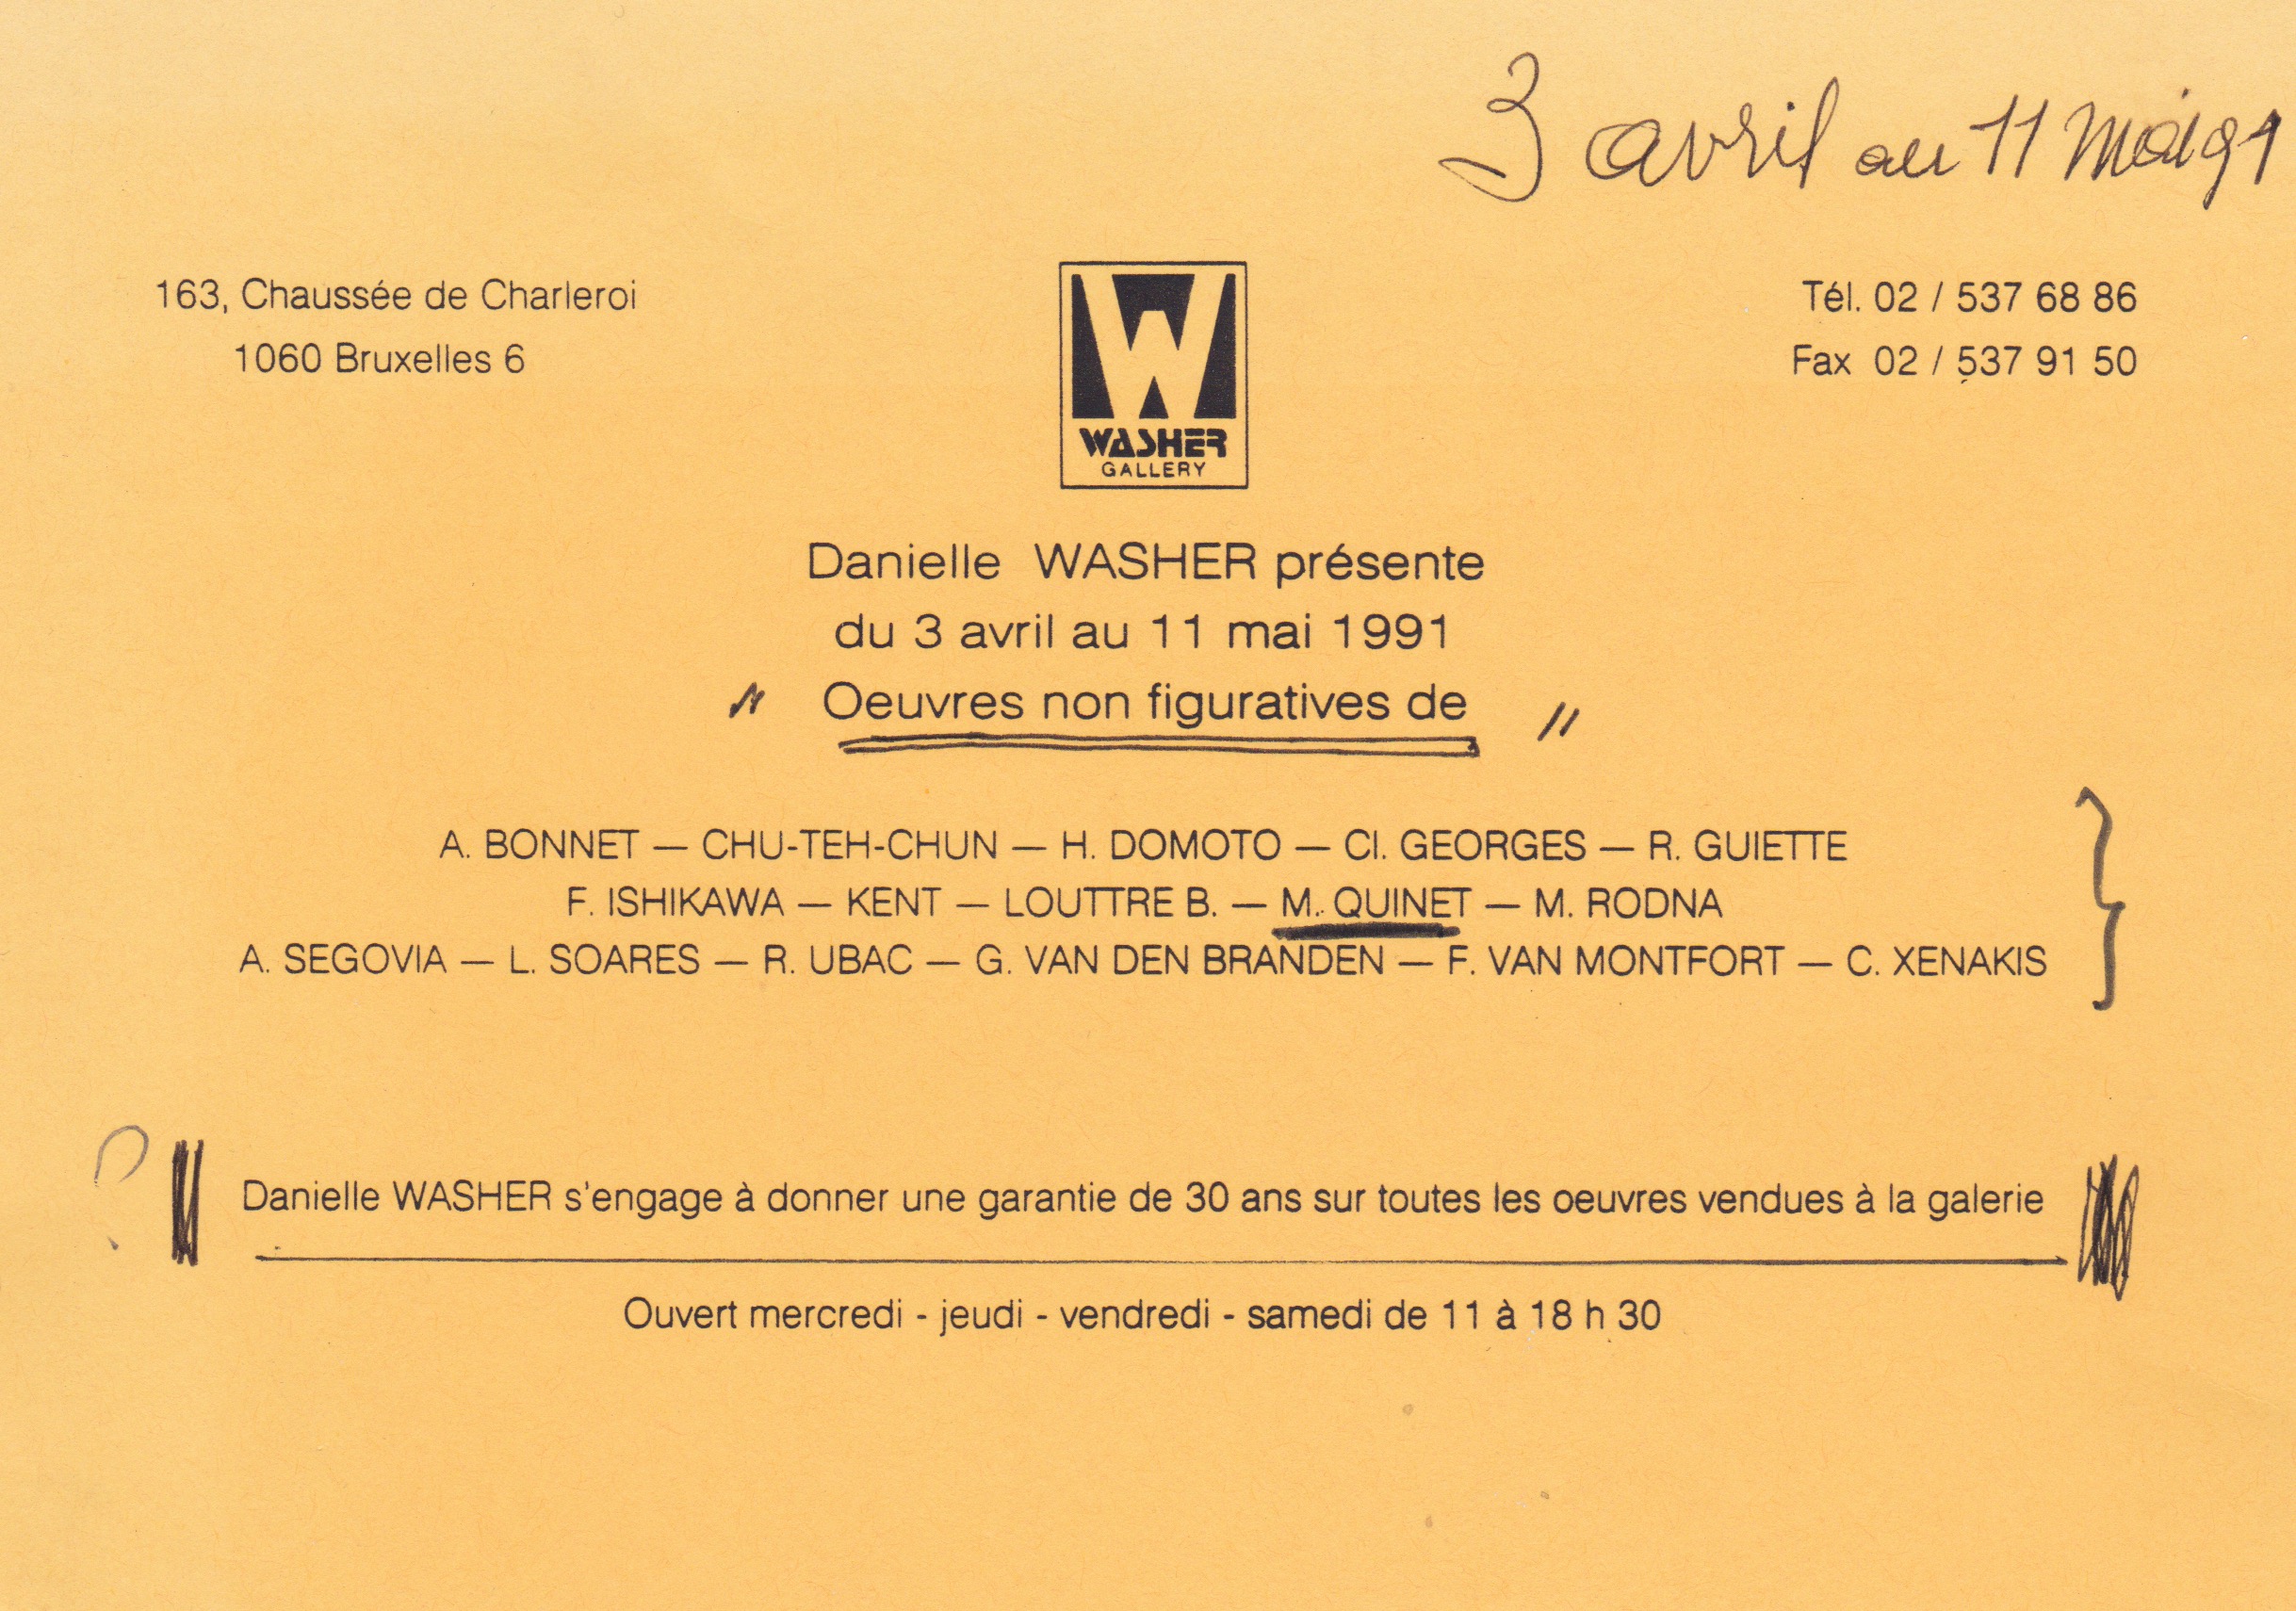 œuvres non figuratives, Washer Gallery, Bruxelles, 1991